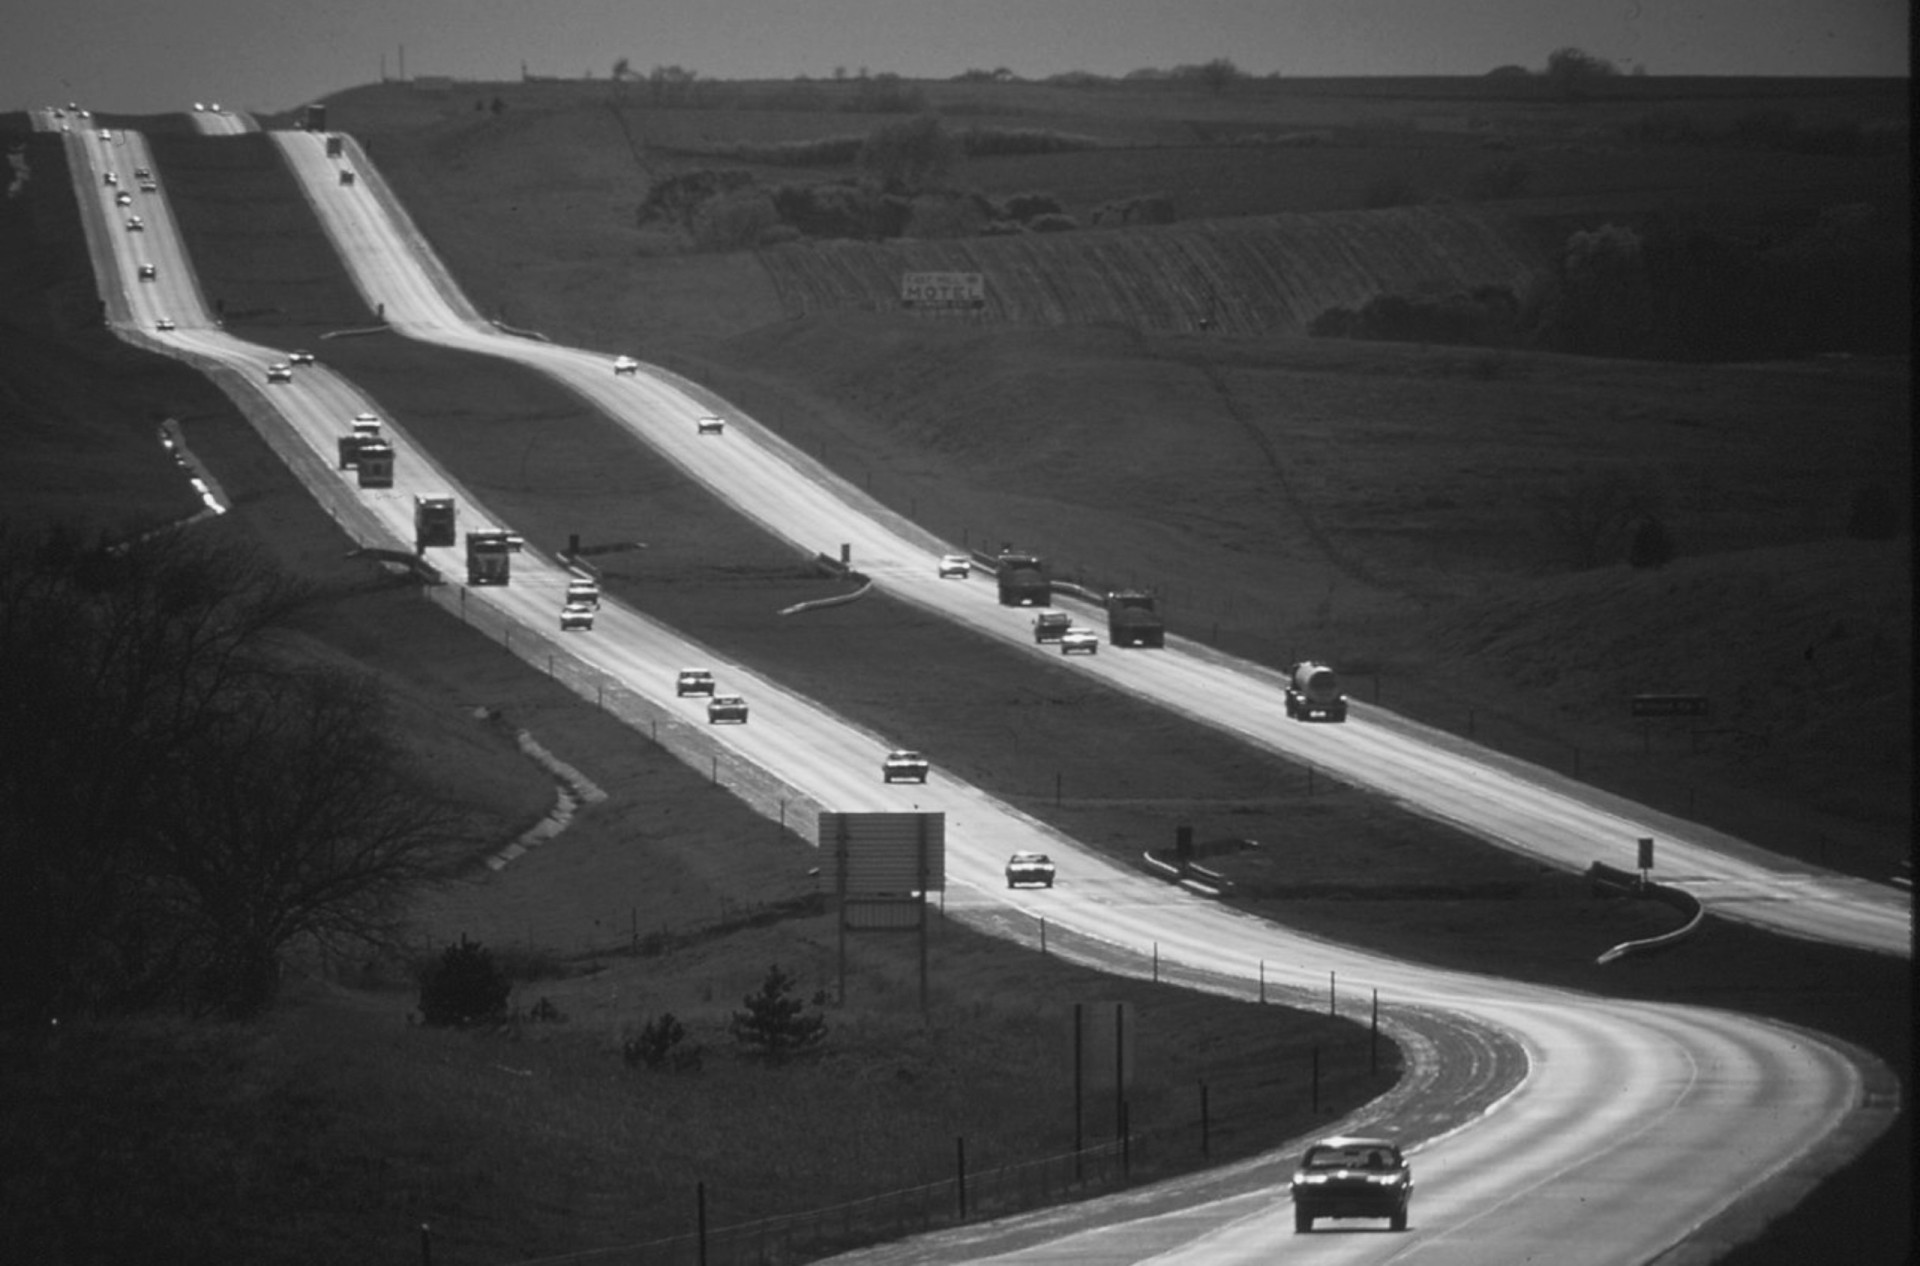 <p>In October 1974, Nebraska became the first state to complete all of its mainline Interstate Highways with the dedication of its final section of Interstate 80. The final segment of I-80 was opened in 1986.</p><p>You may also like:<a href="https://www.starsinsider.com/n/434645?utm_source=msn.com&utm_medium=display&utm_campaign=referral_description&utm_content=697904en-us"> Surprising character traits that indicate a high IQ</a></p>